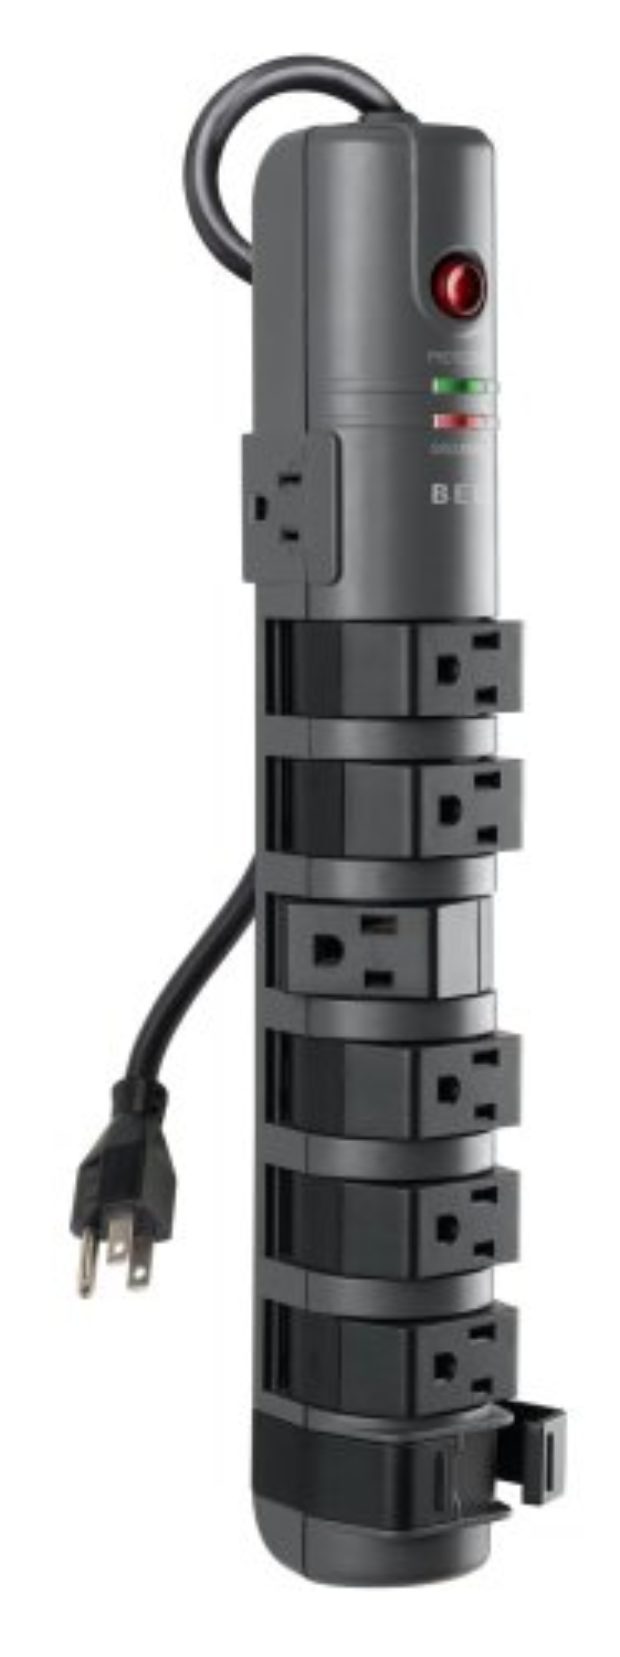 Normally $31, this surge protector is 55 percent off today (Photo via Amazon)